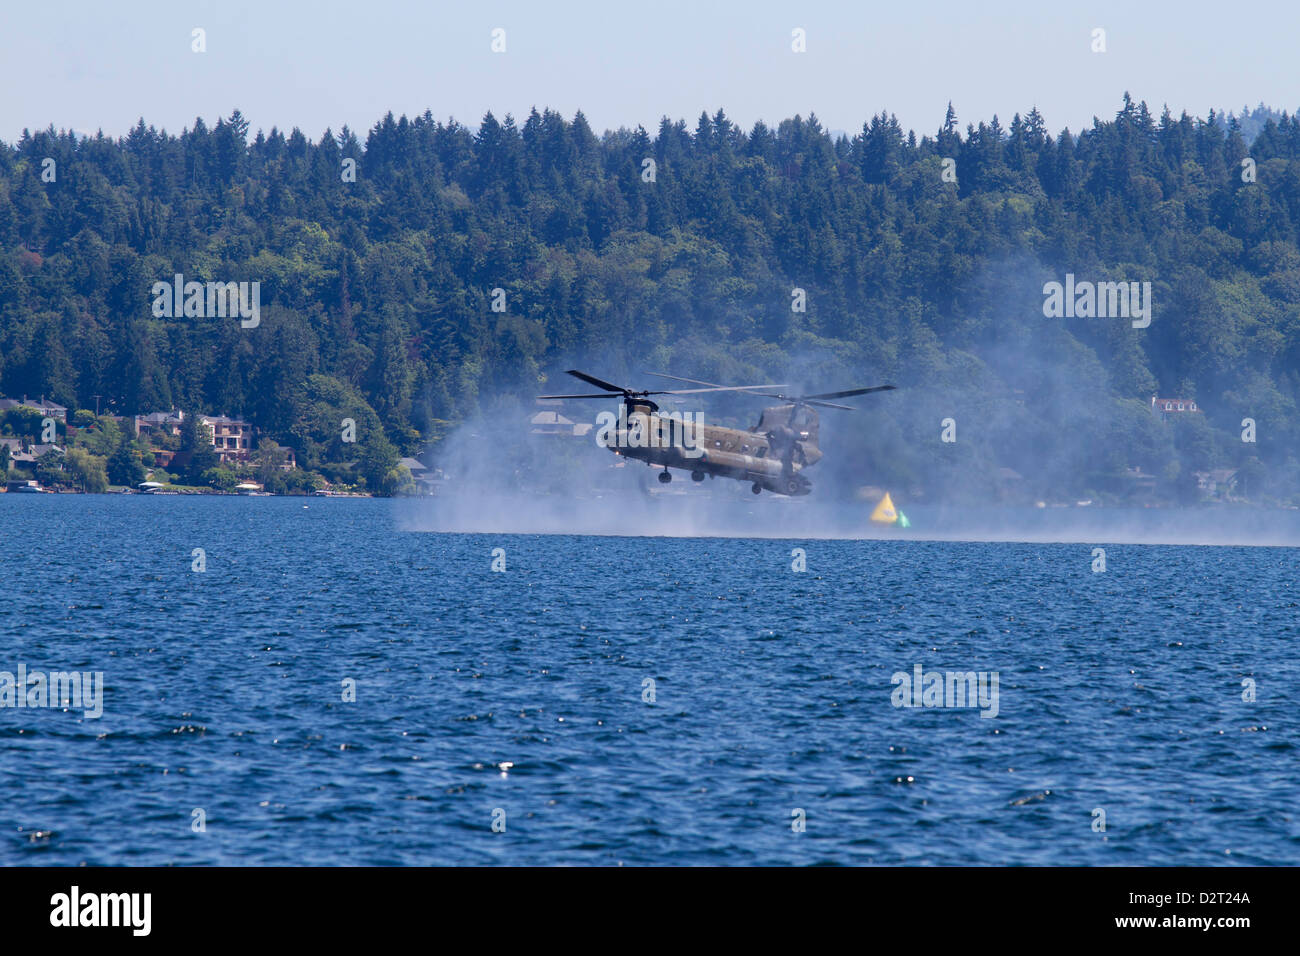 WA, Seattle, Seafair, US Army CH-47 Chinook Helicopter, Special Forces demonstration Stock Photo